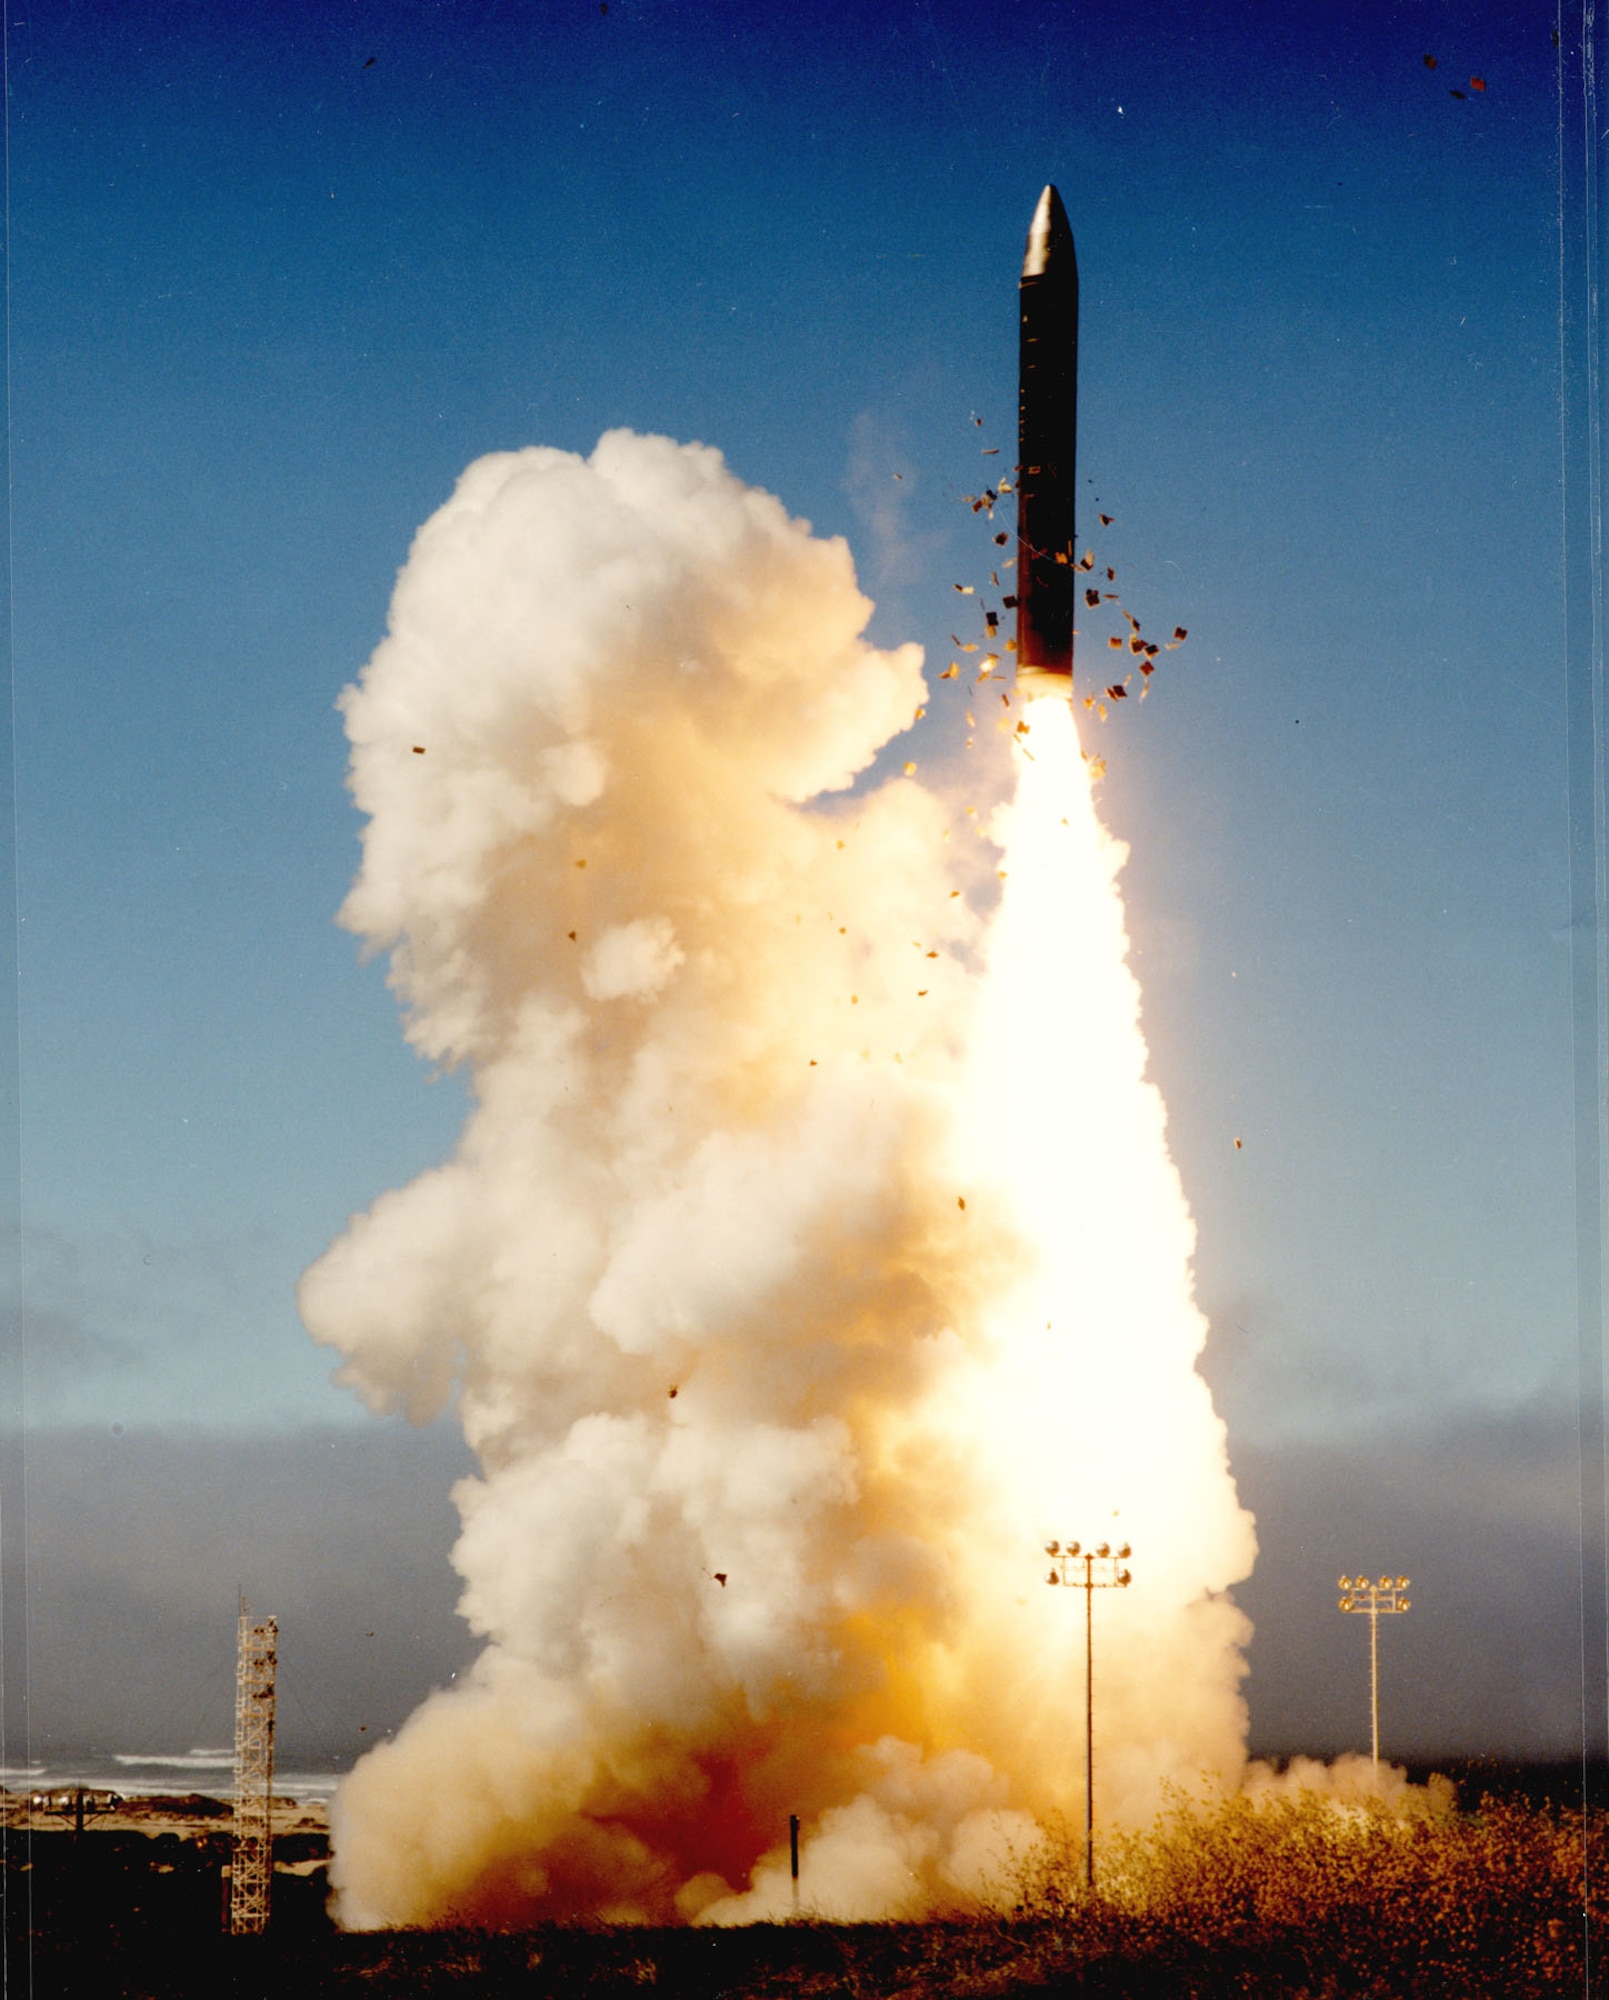 The LGM-118A’s first stage solid rocket ignites as the missile clears the silo. (U.S. Air Force photo)